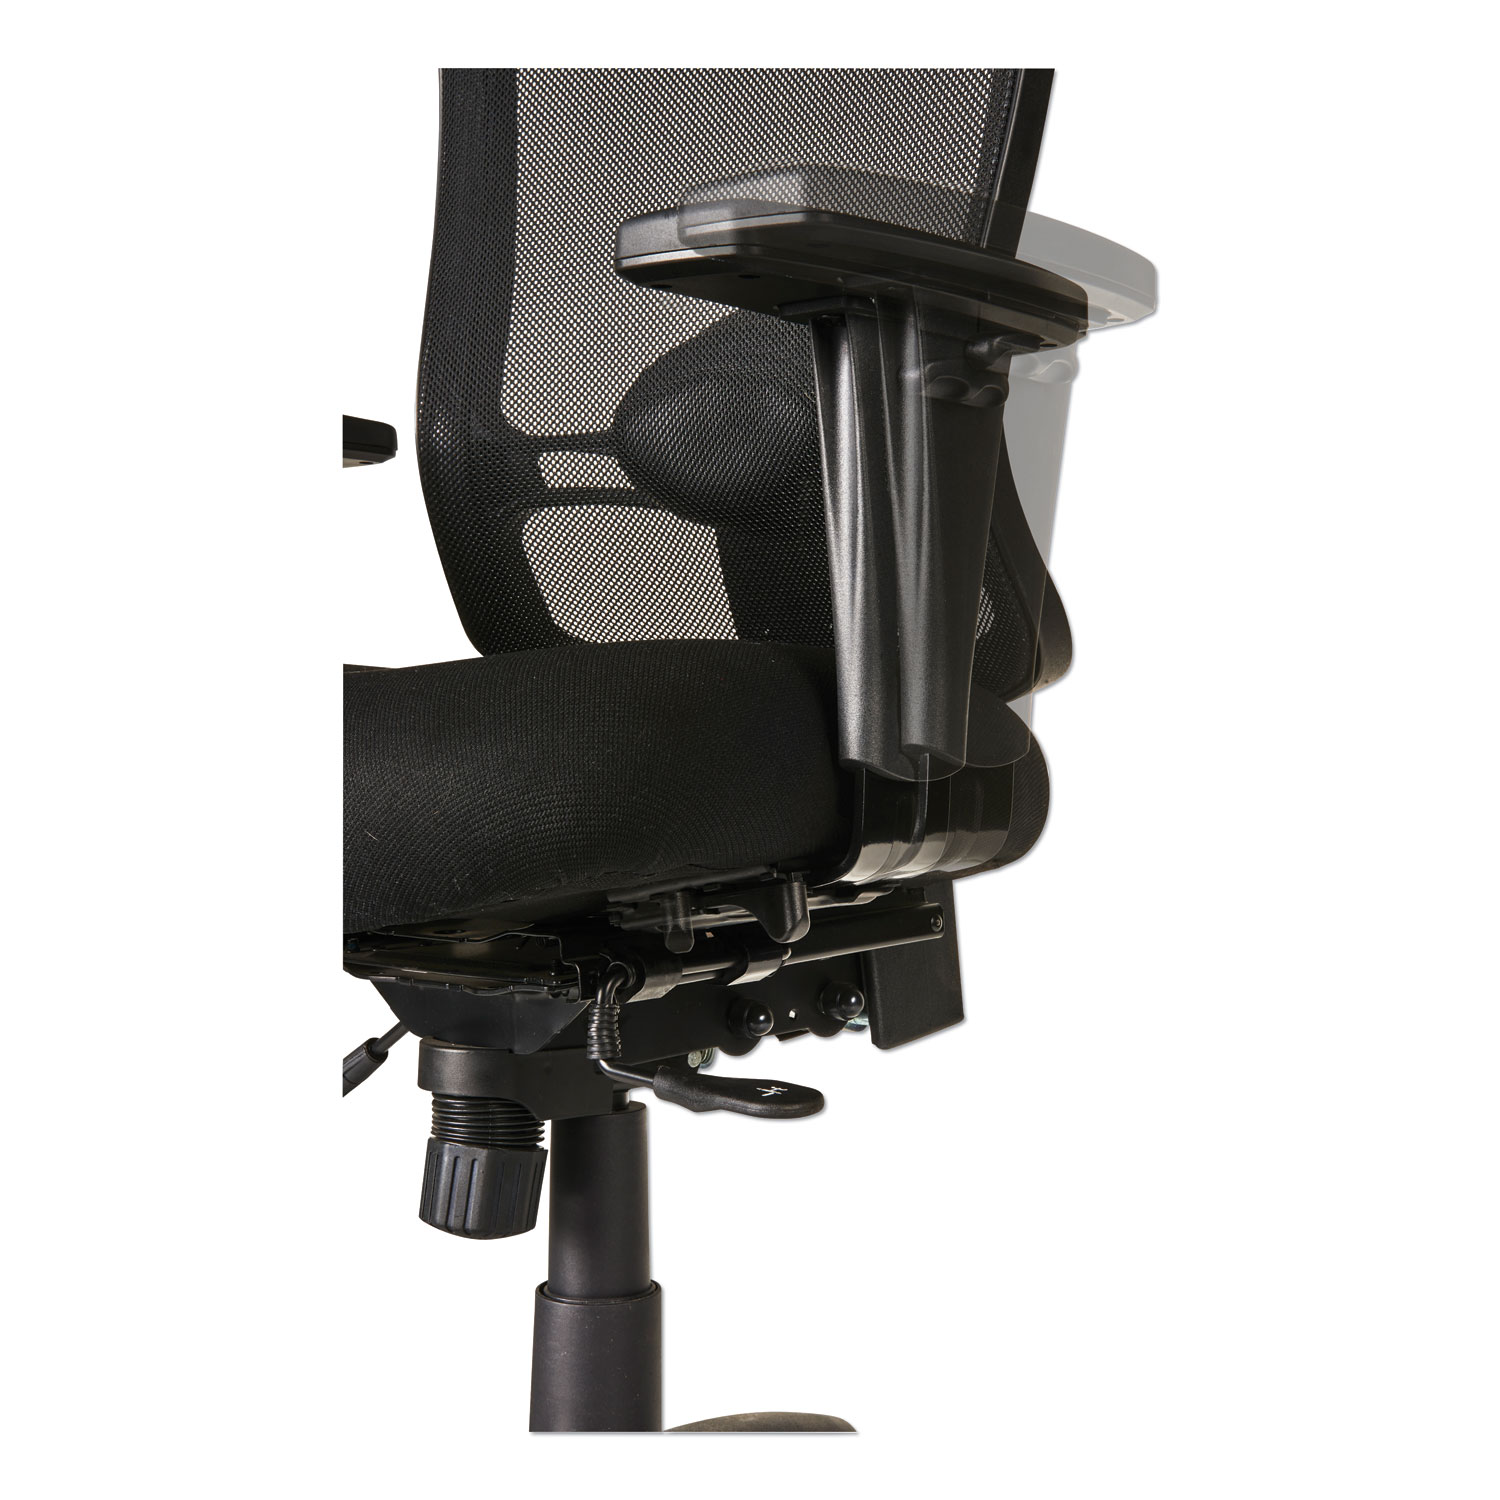 Alera Etros Series Mid-Back Multifunction with Seat Slide Chair, Supports up to 275 lbs., Black Seat/Black Back, Black Base